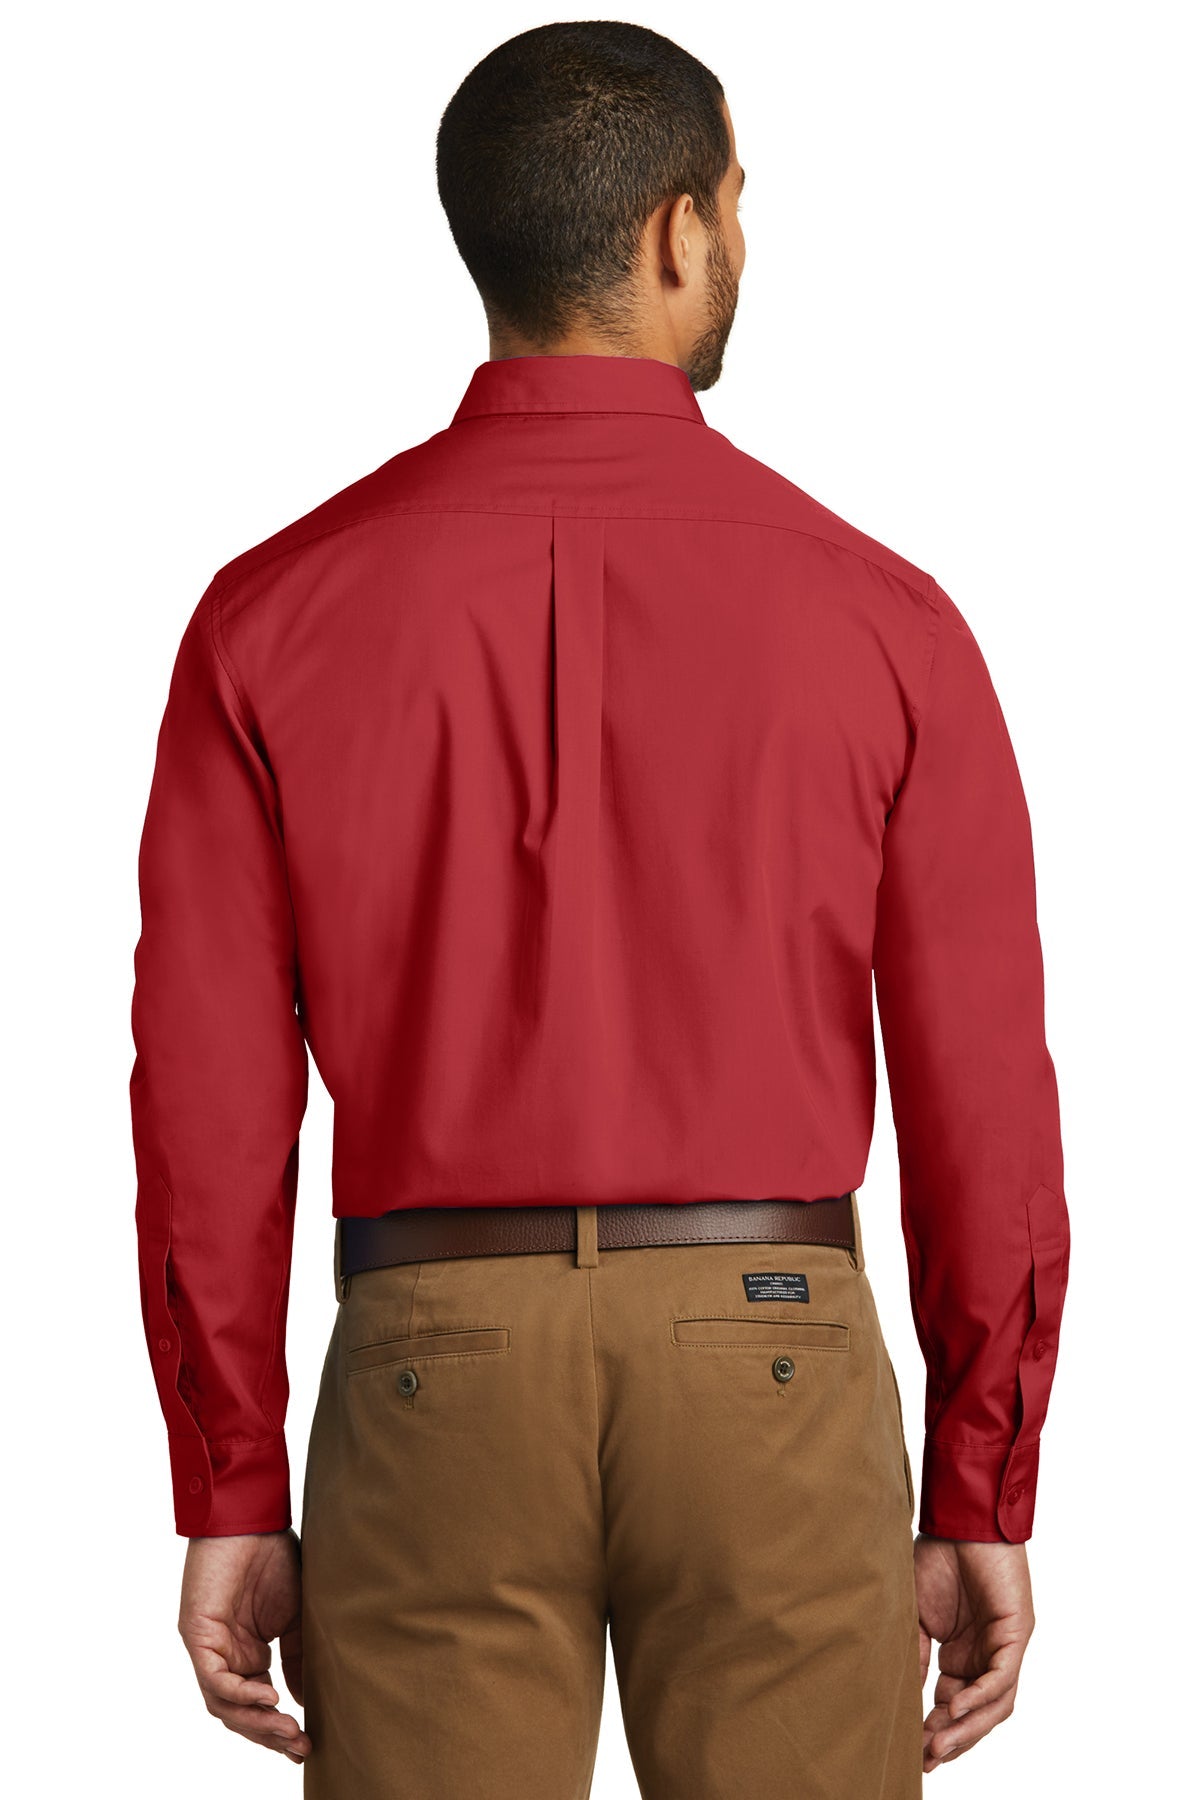 port authority_w100 _rich red_company_logo_button downs